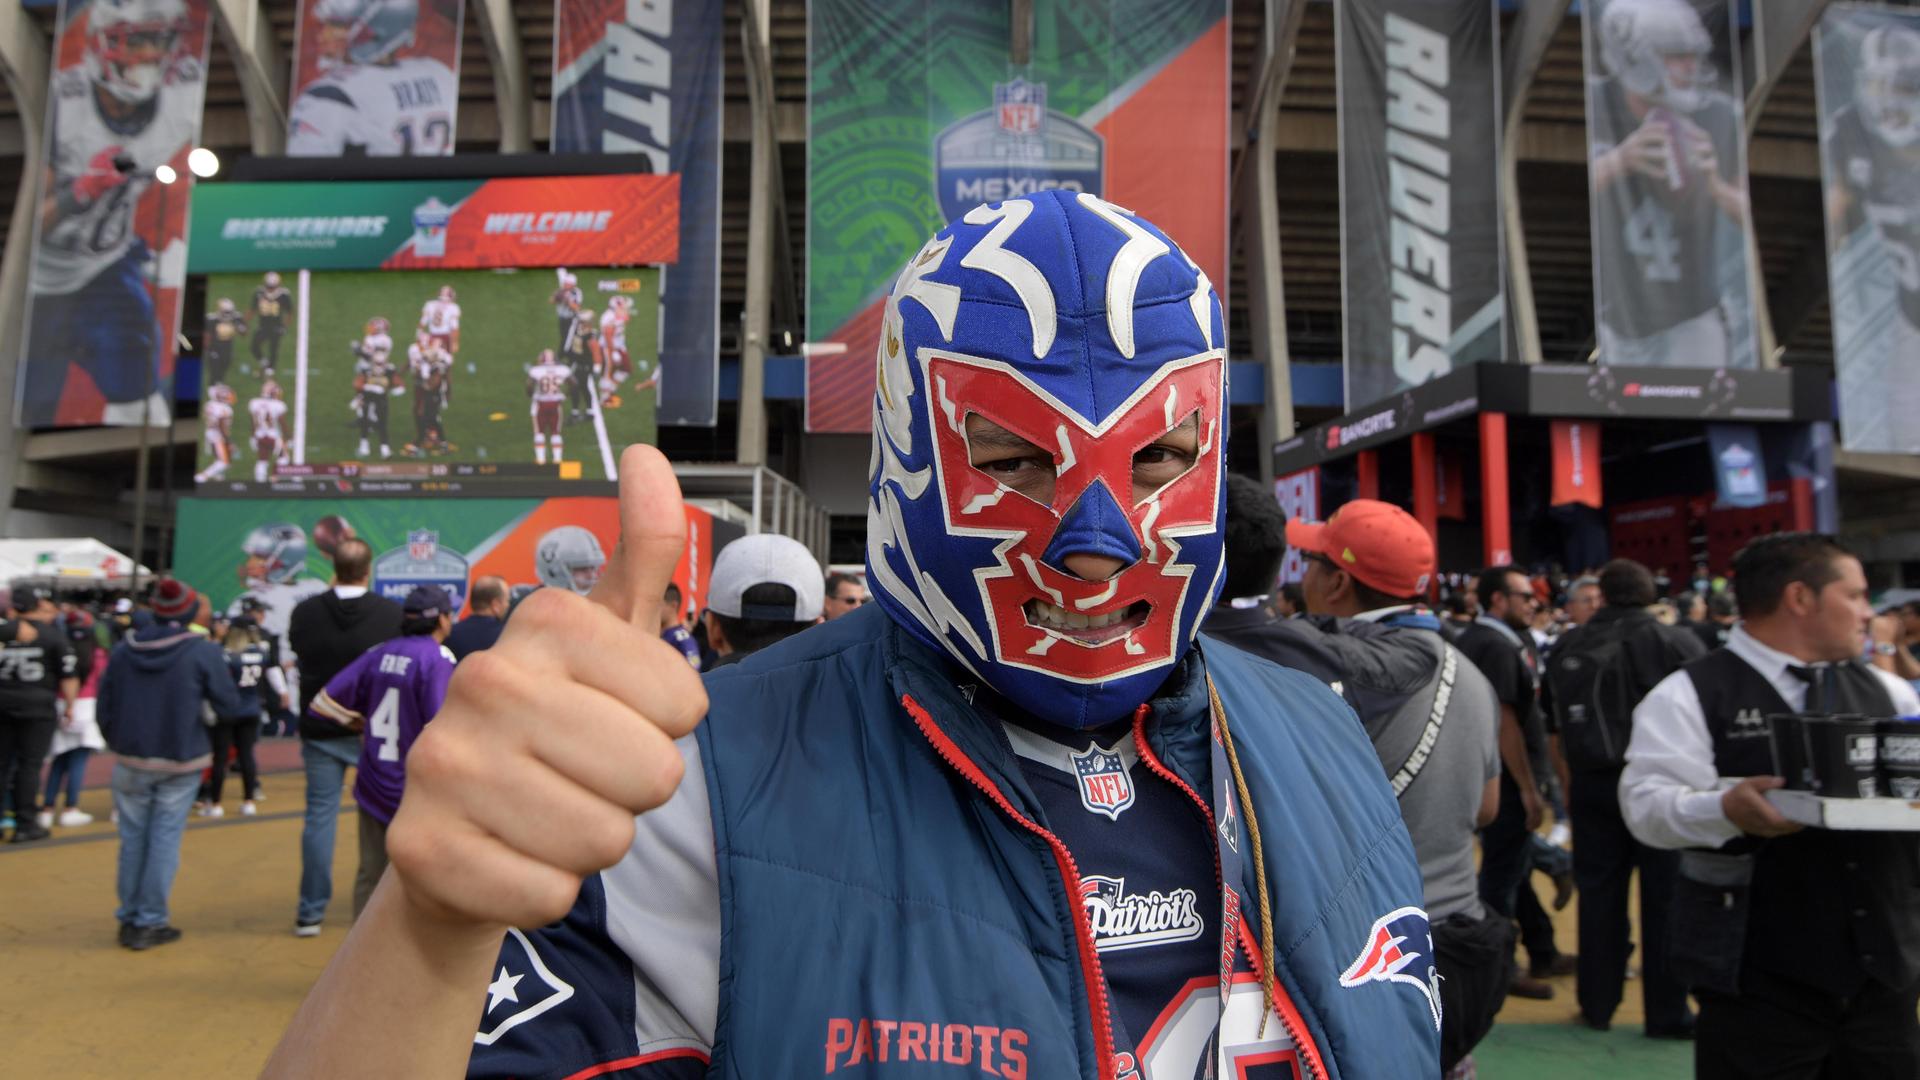 A Patriots fan poses before a NFL International Series game in Mexico City in November 2017. The Patriots have become Mexico’s team. Winning helps. The Patriots are heading to their 11th Super Bowl on Sunday, and ninth since 2002, the most of any NFL fran